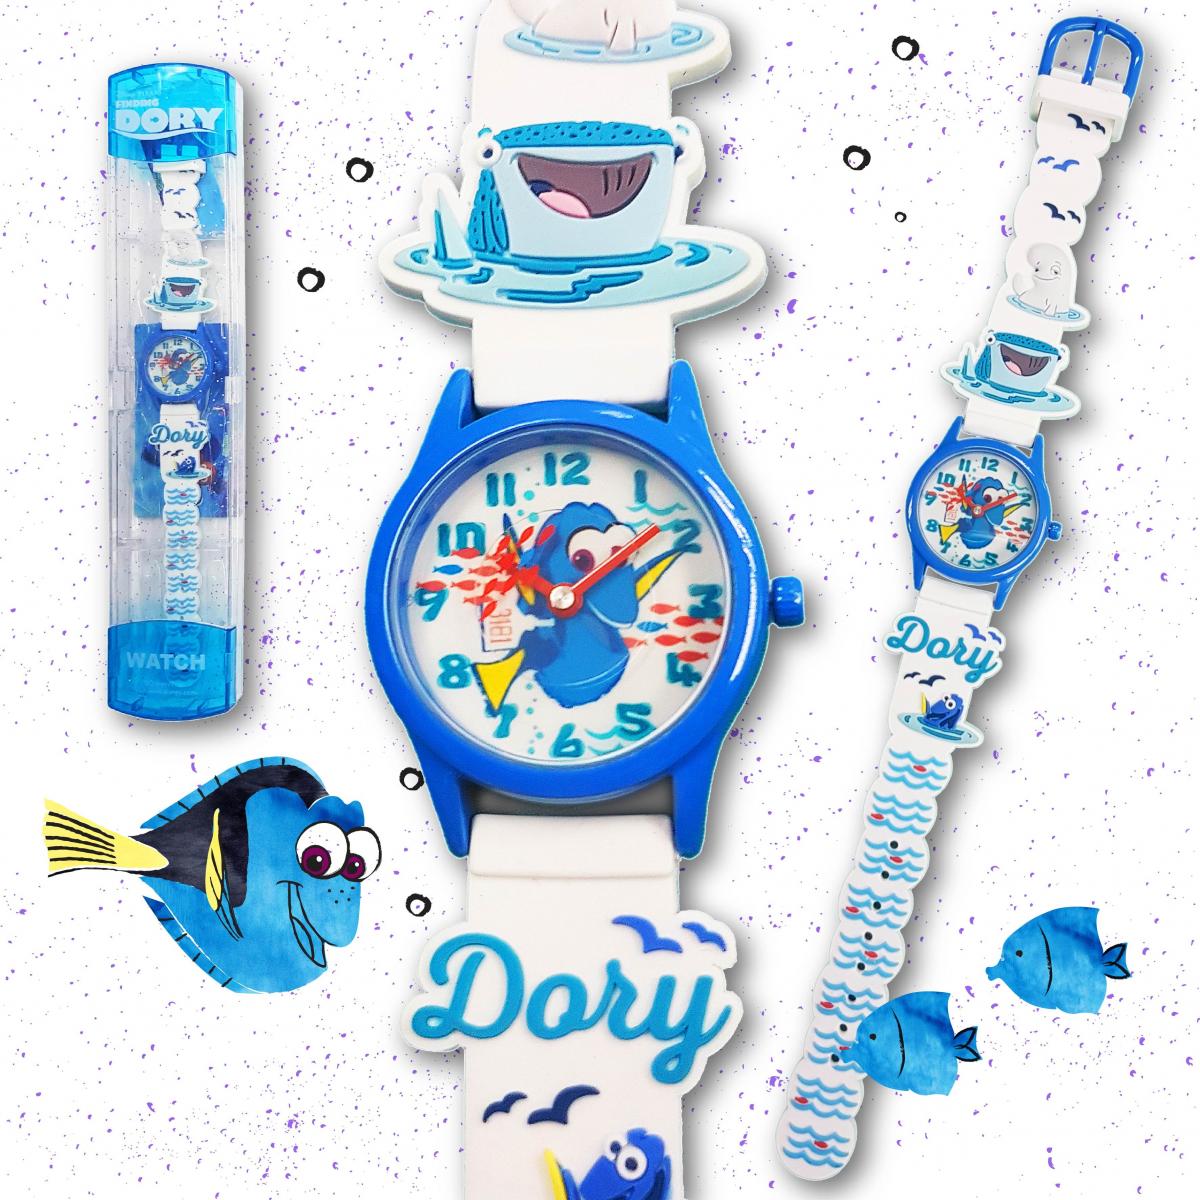 DISNEY-FINDING DORY 2D WATCH (Licensed by Disney)